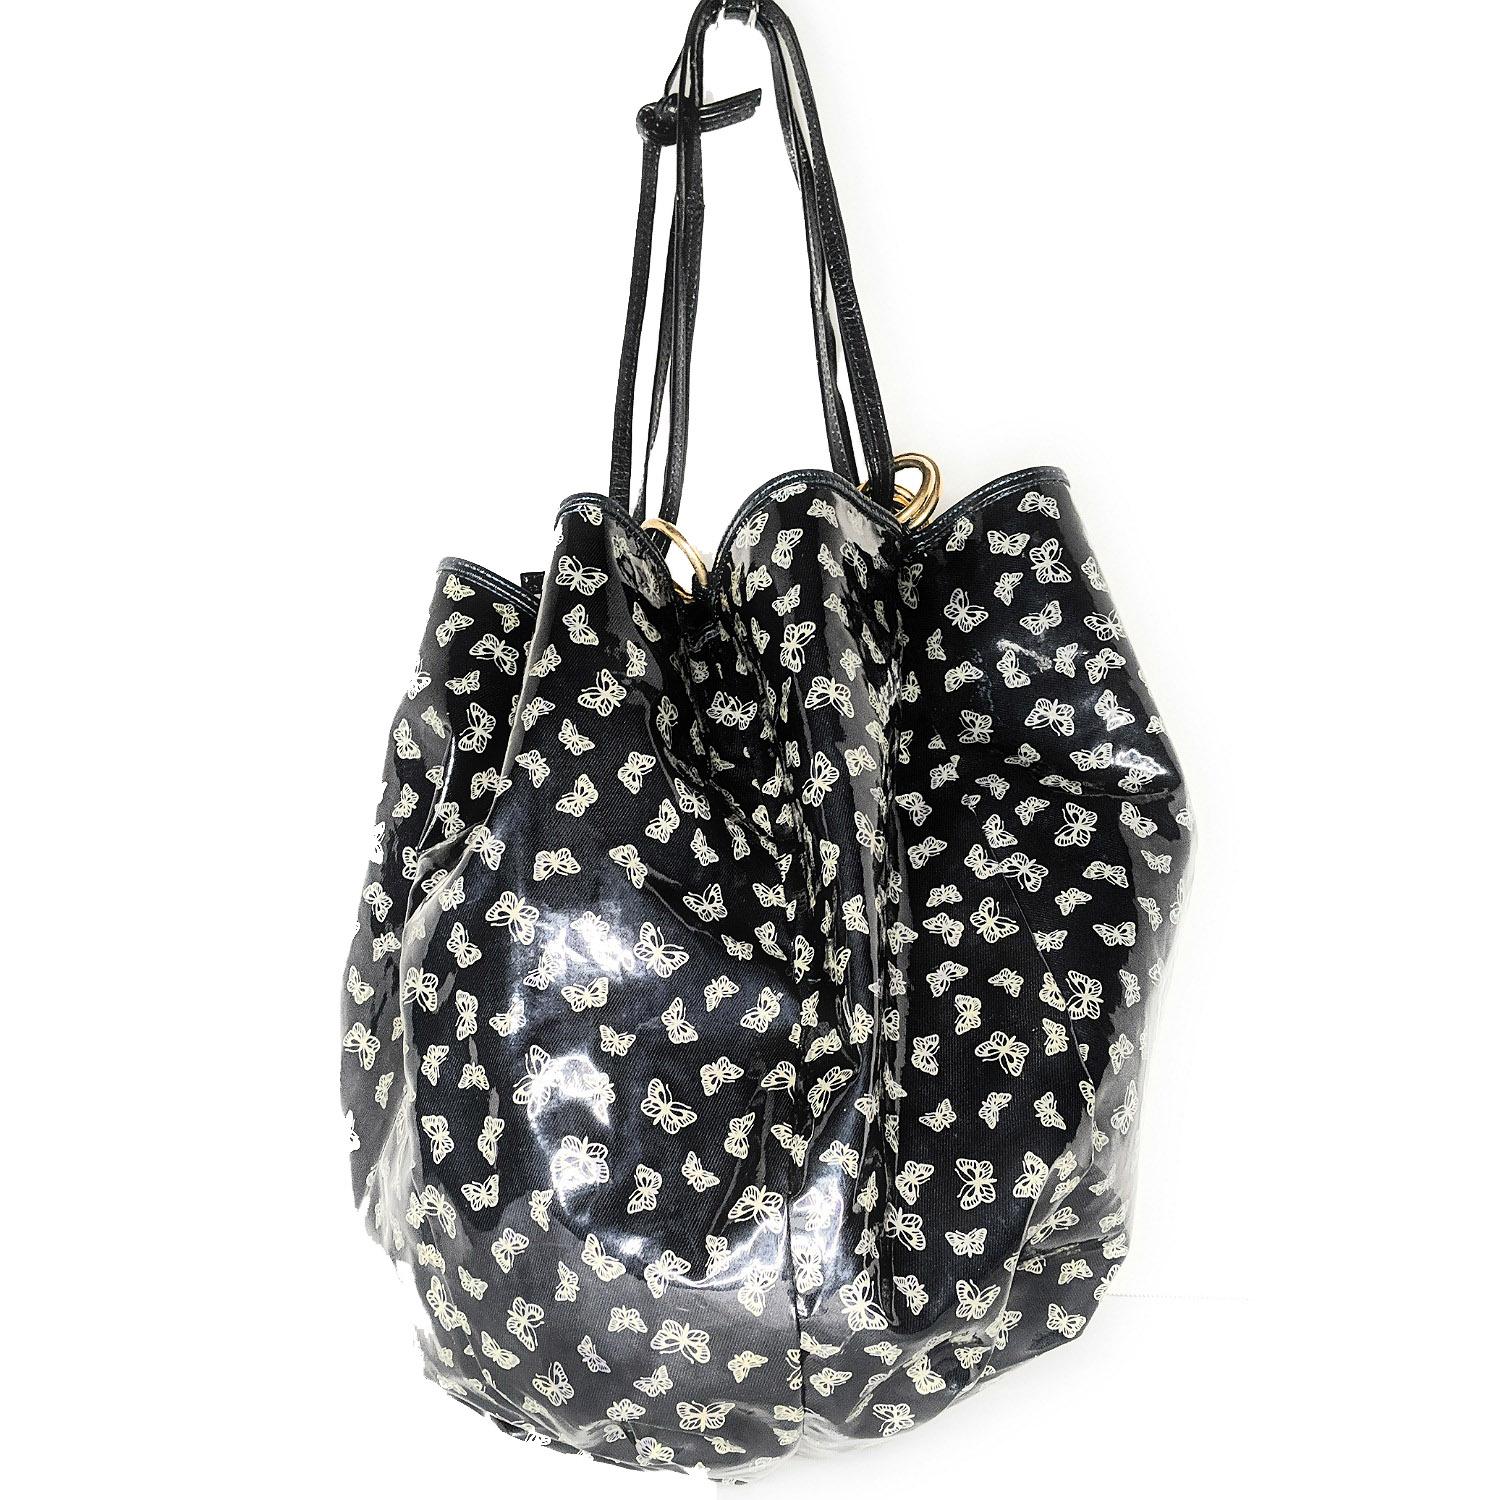 Casual meets dressy; this stylish butterfly-print bucket bag is beautifully crafted of vinyl coated exterior with golden brass hardware. The bag features a drawstring closure. A roomy interior lined in vinyl. Made in Italy.

Designer: Bottega